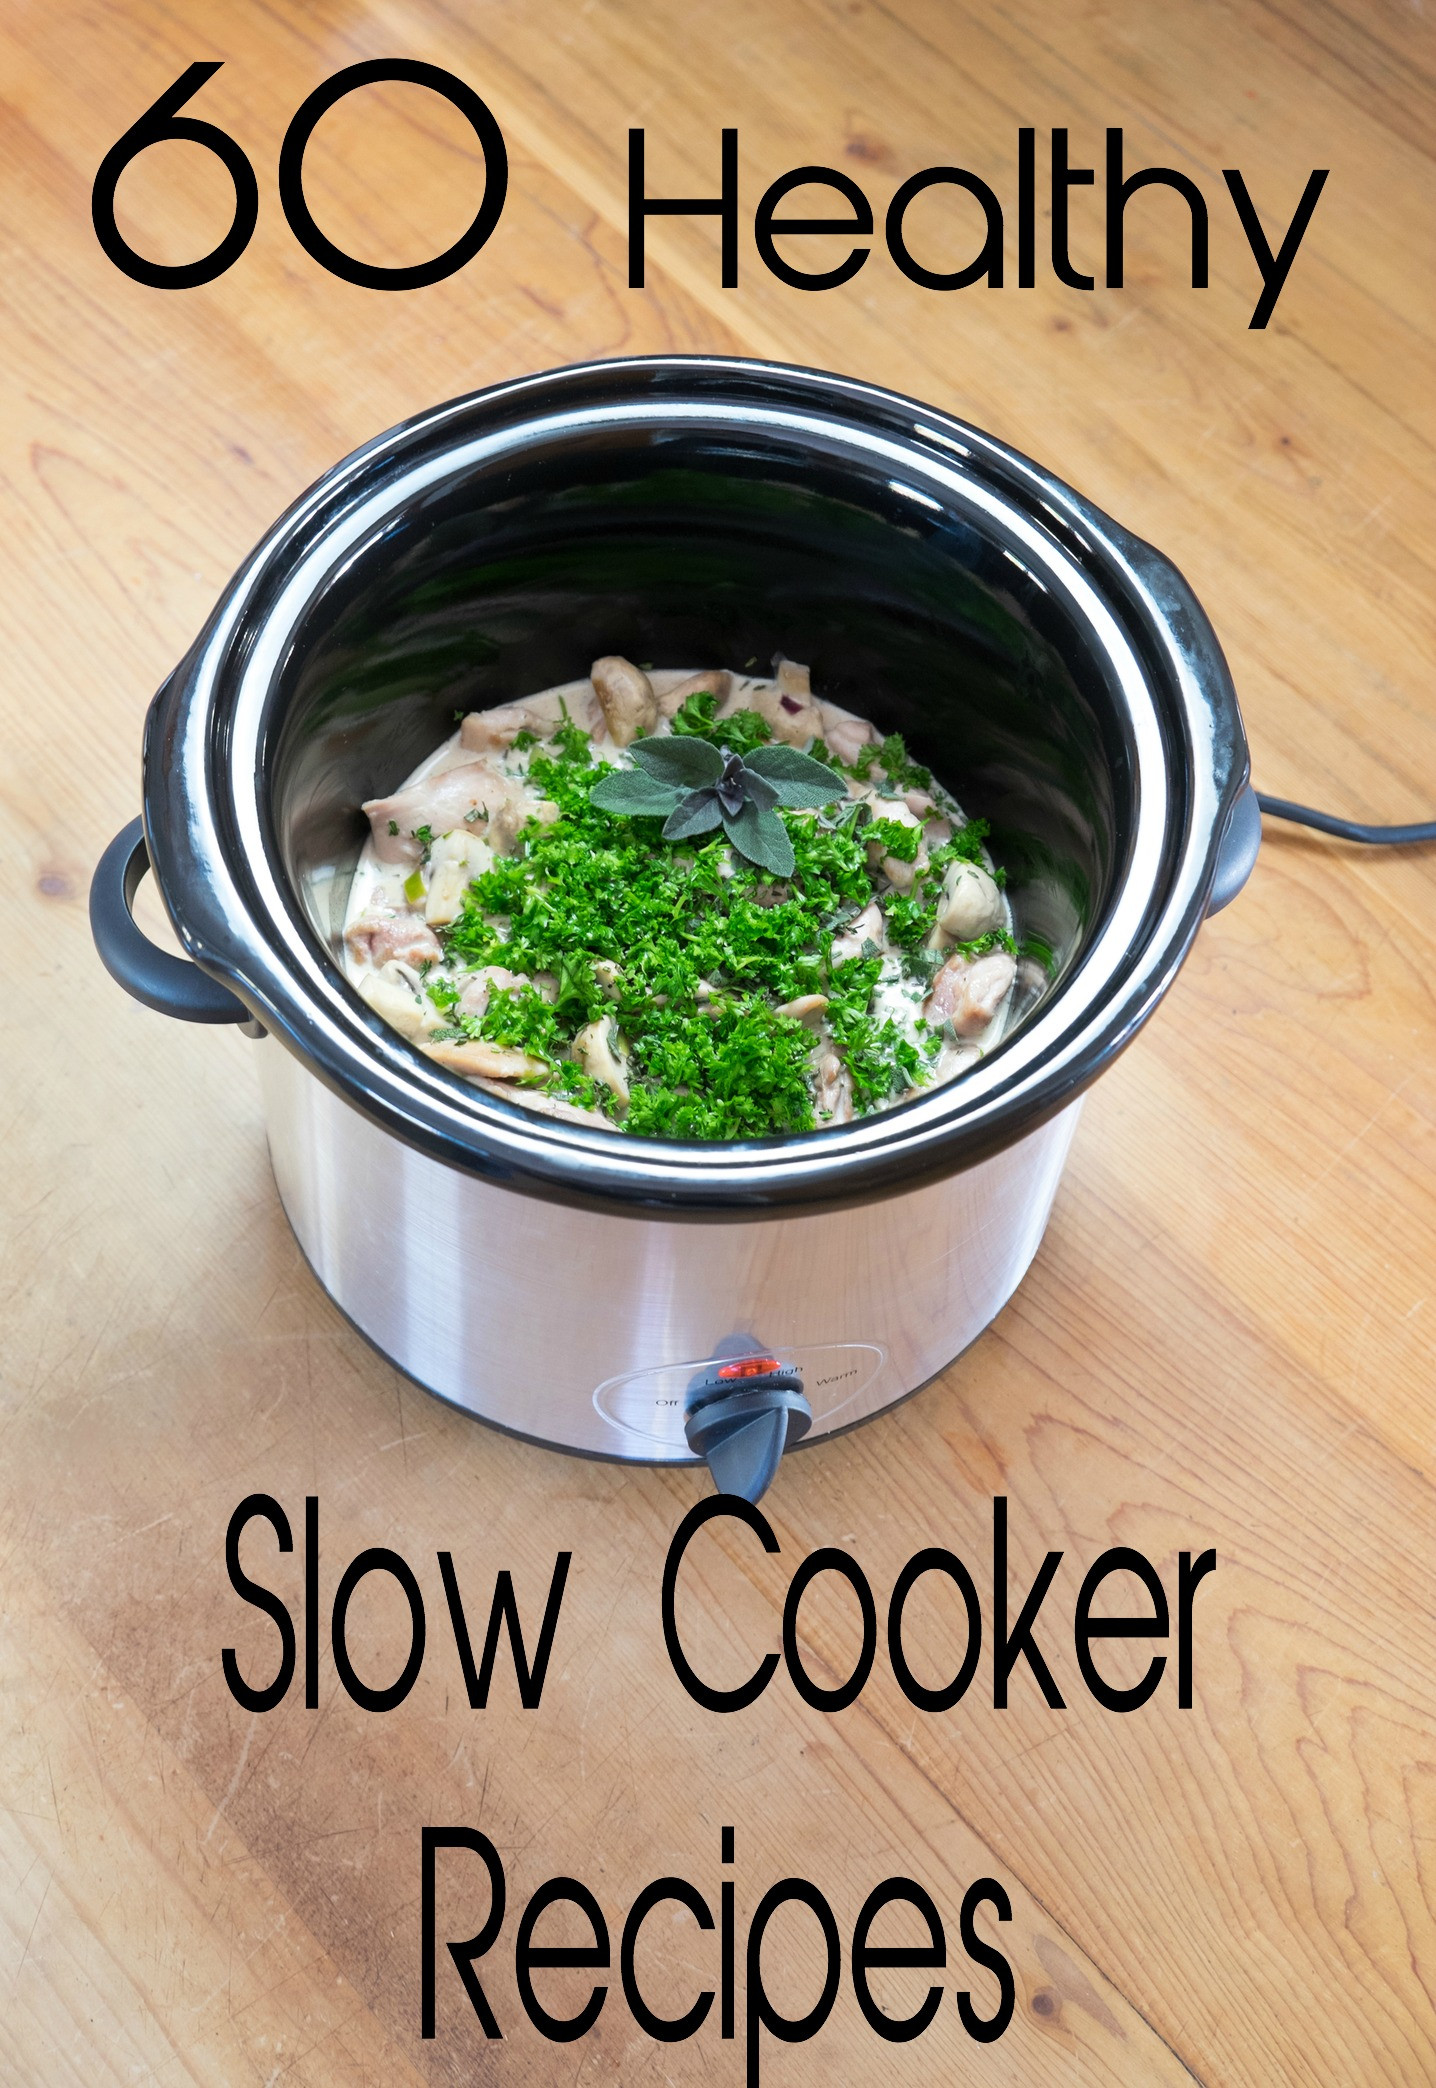 Easy Slow Cooker Recipes Healthy
 60 easy and healthy slow cooker recipes Eat Well Spend Smart